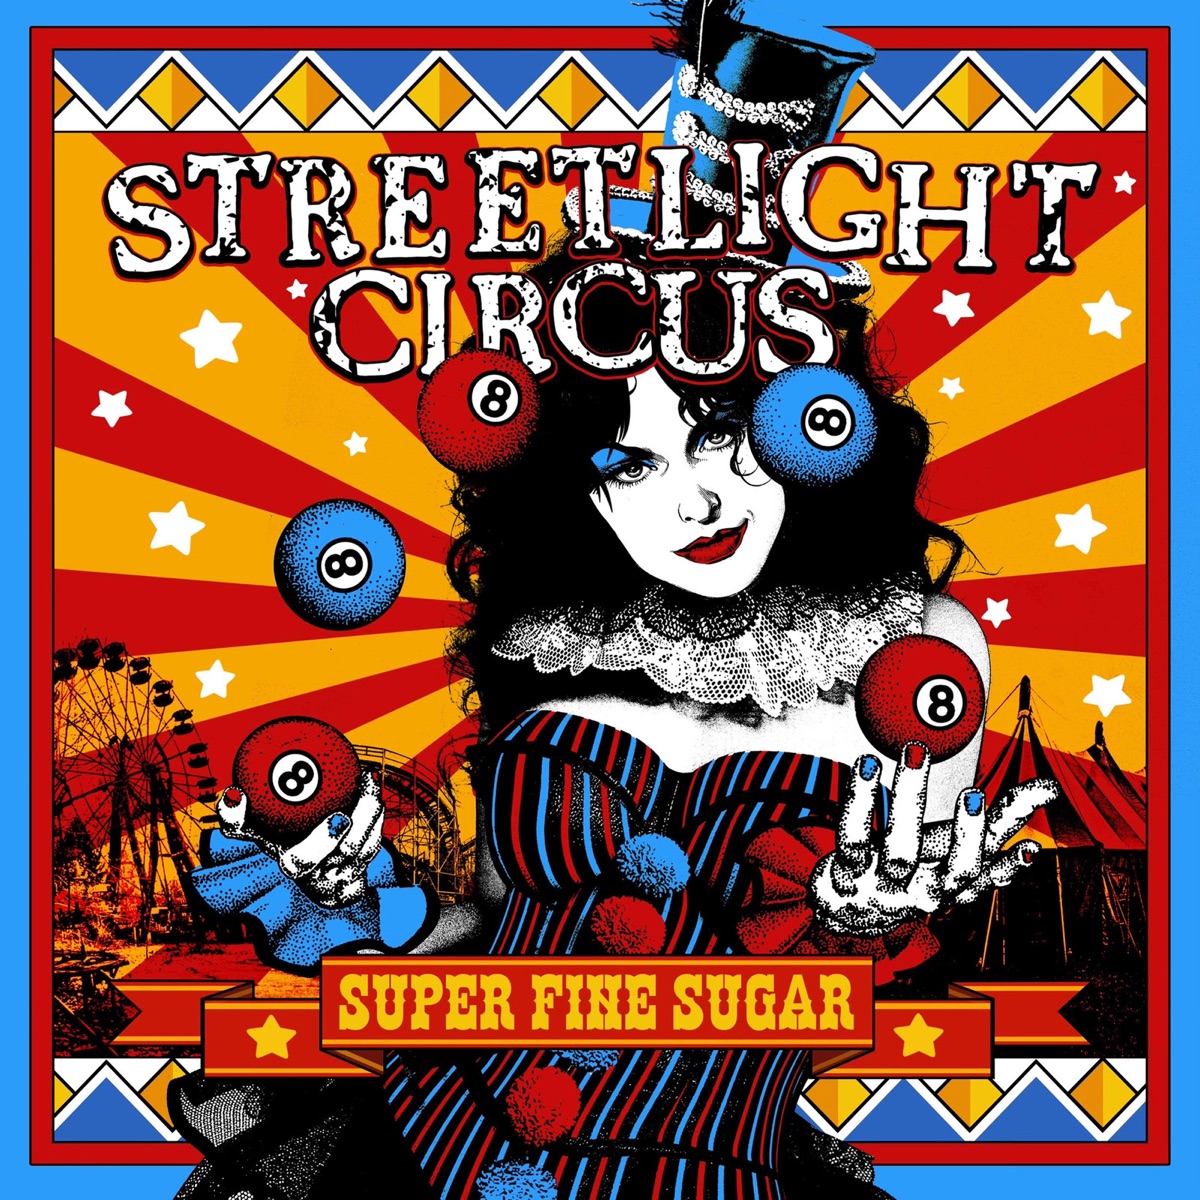 Art for Drive It Like I Stole It by Streetlight Circus